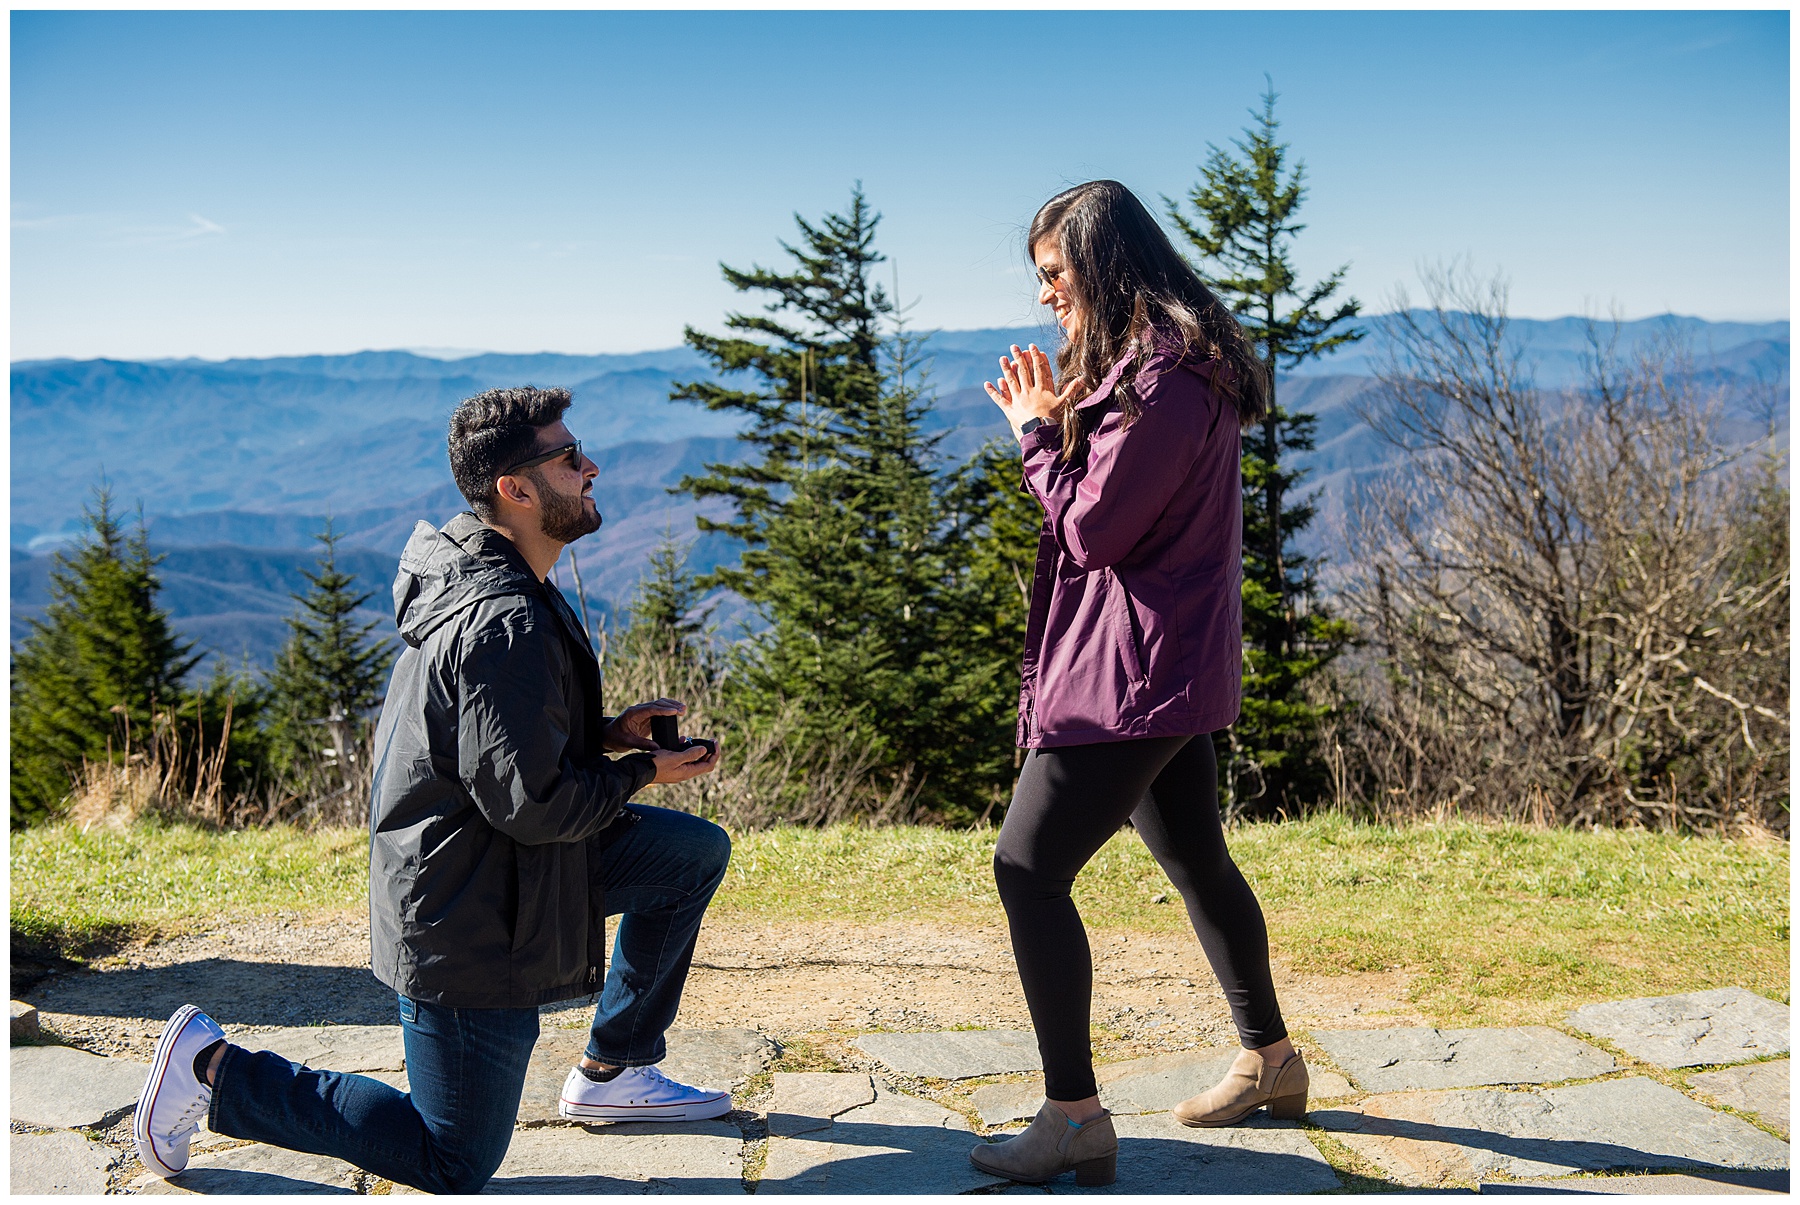 man proposing to woman in Smoky Mountain National Park after proposal planning for months